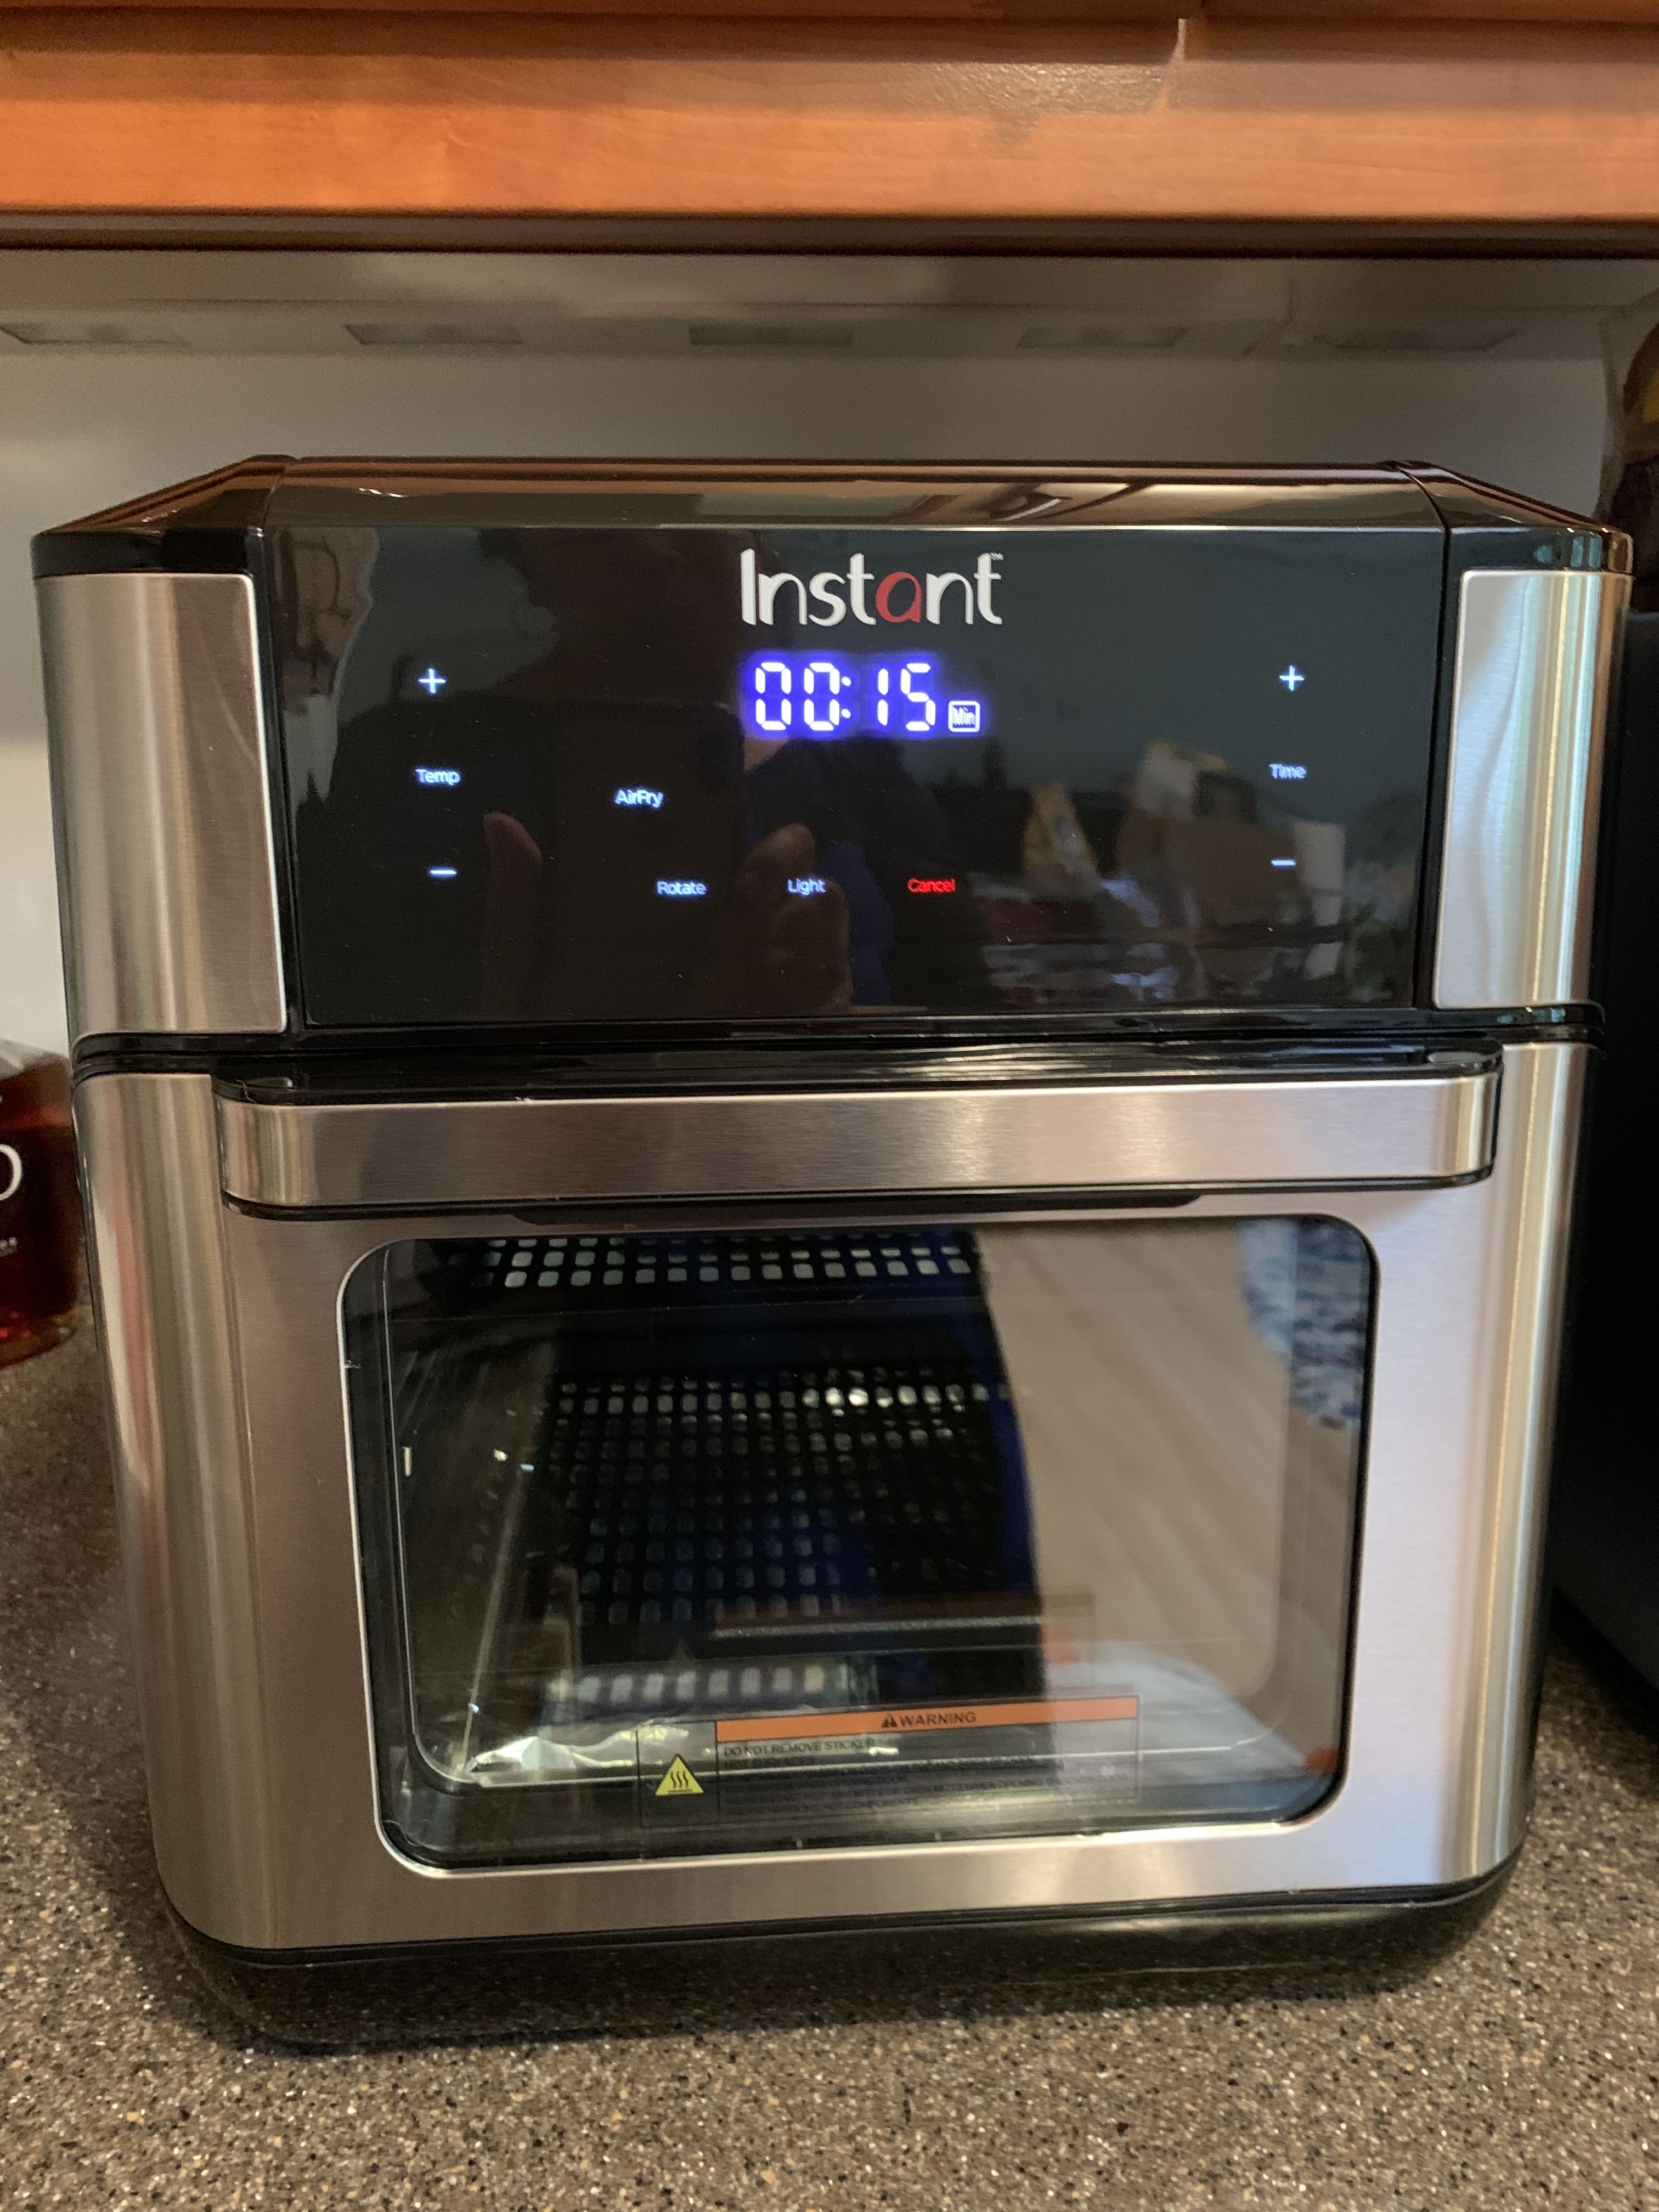 How the Instant Vortex Plus Air Fryer Replaced My Oven